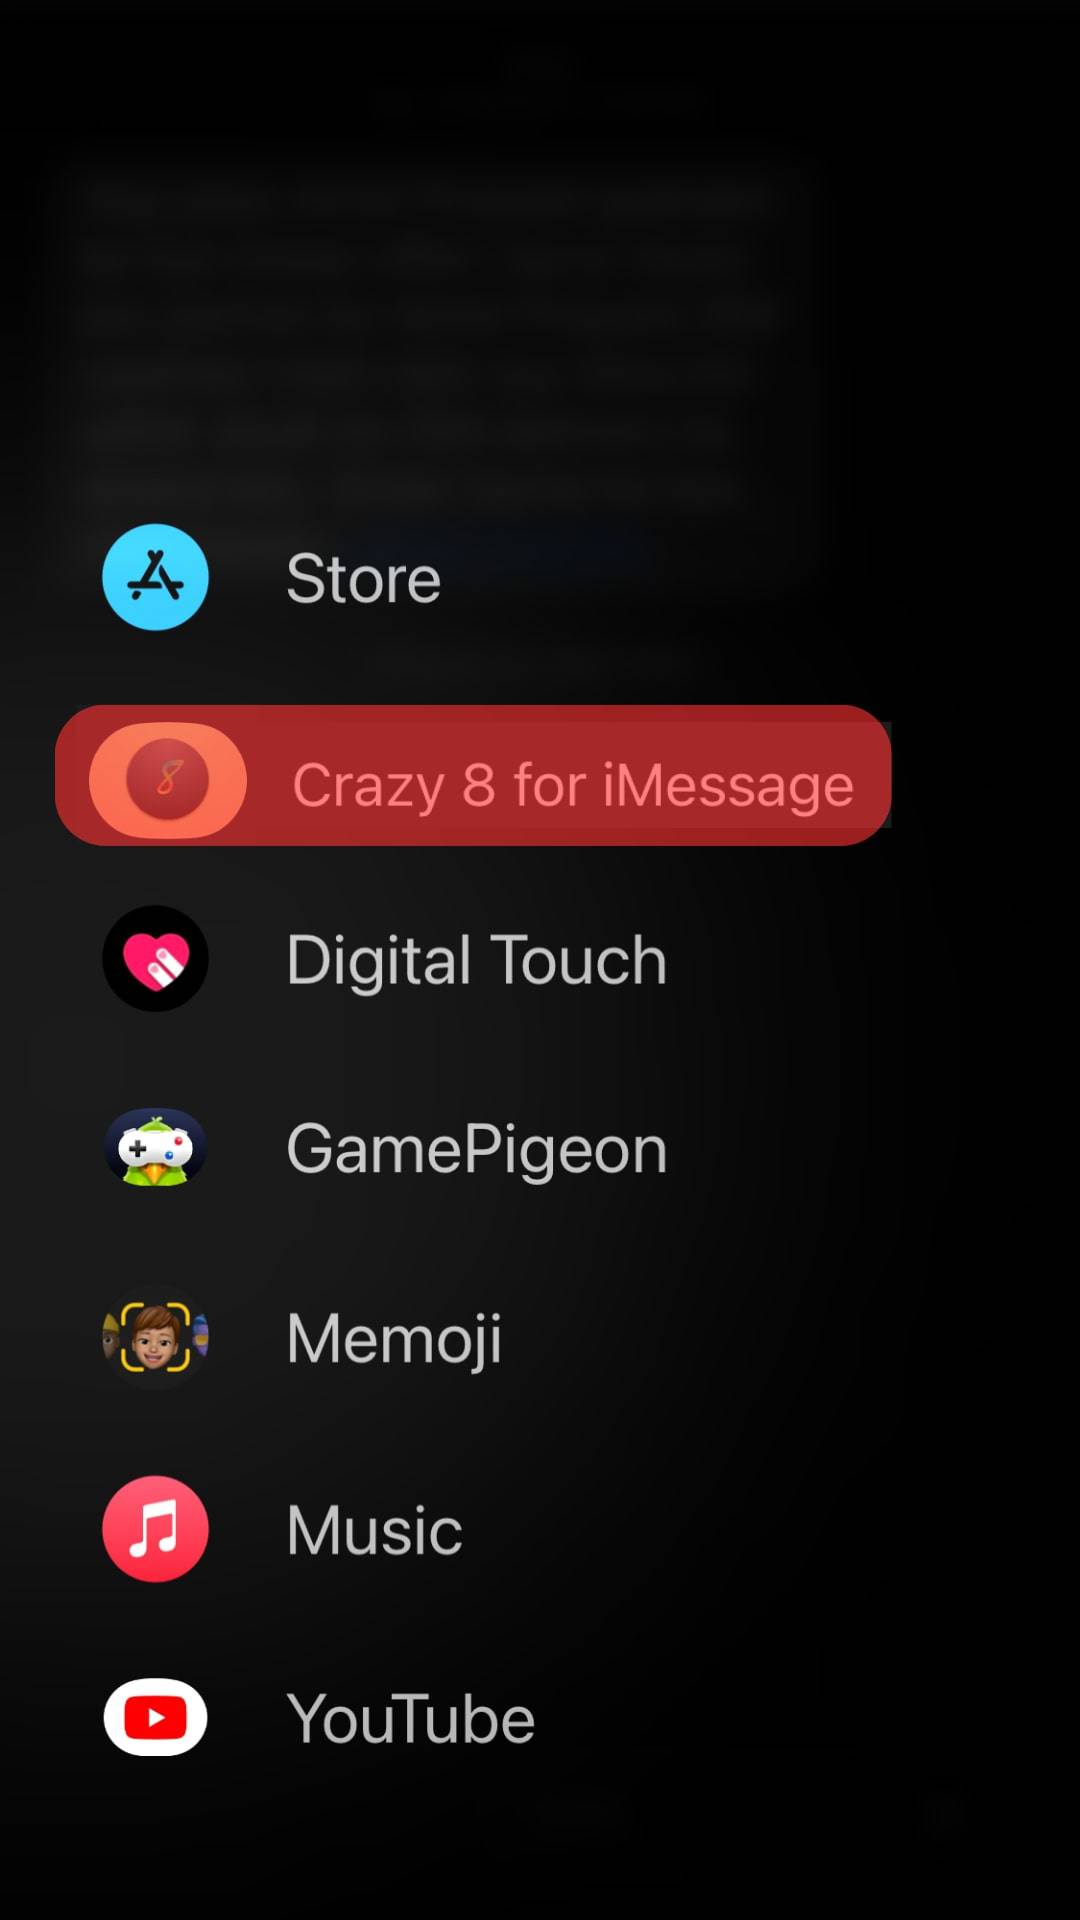 Select The Crazy 8 Game Icon From The App Drawer.